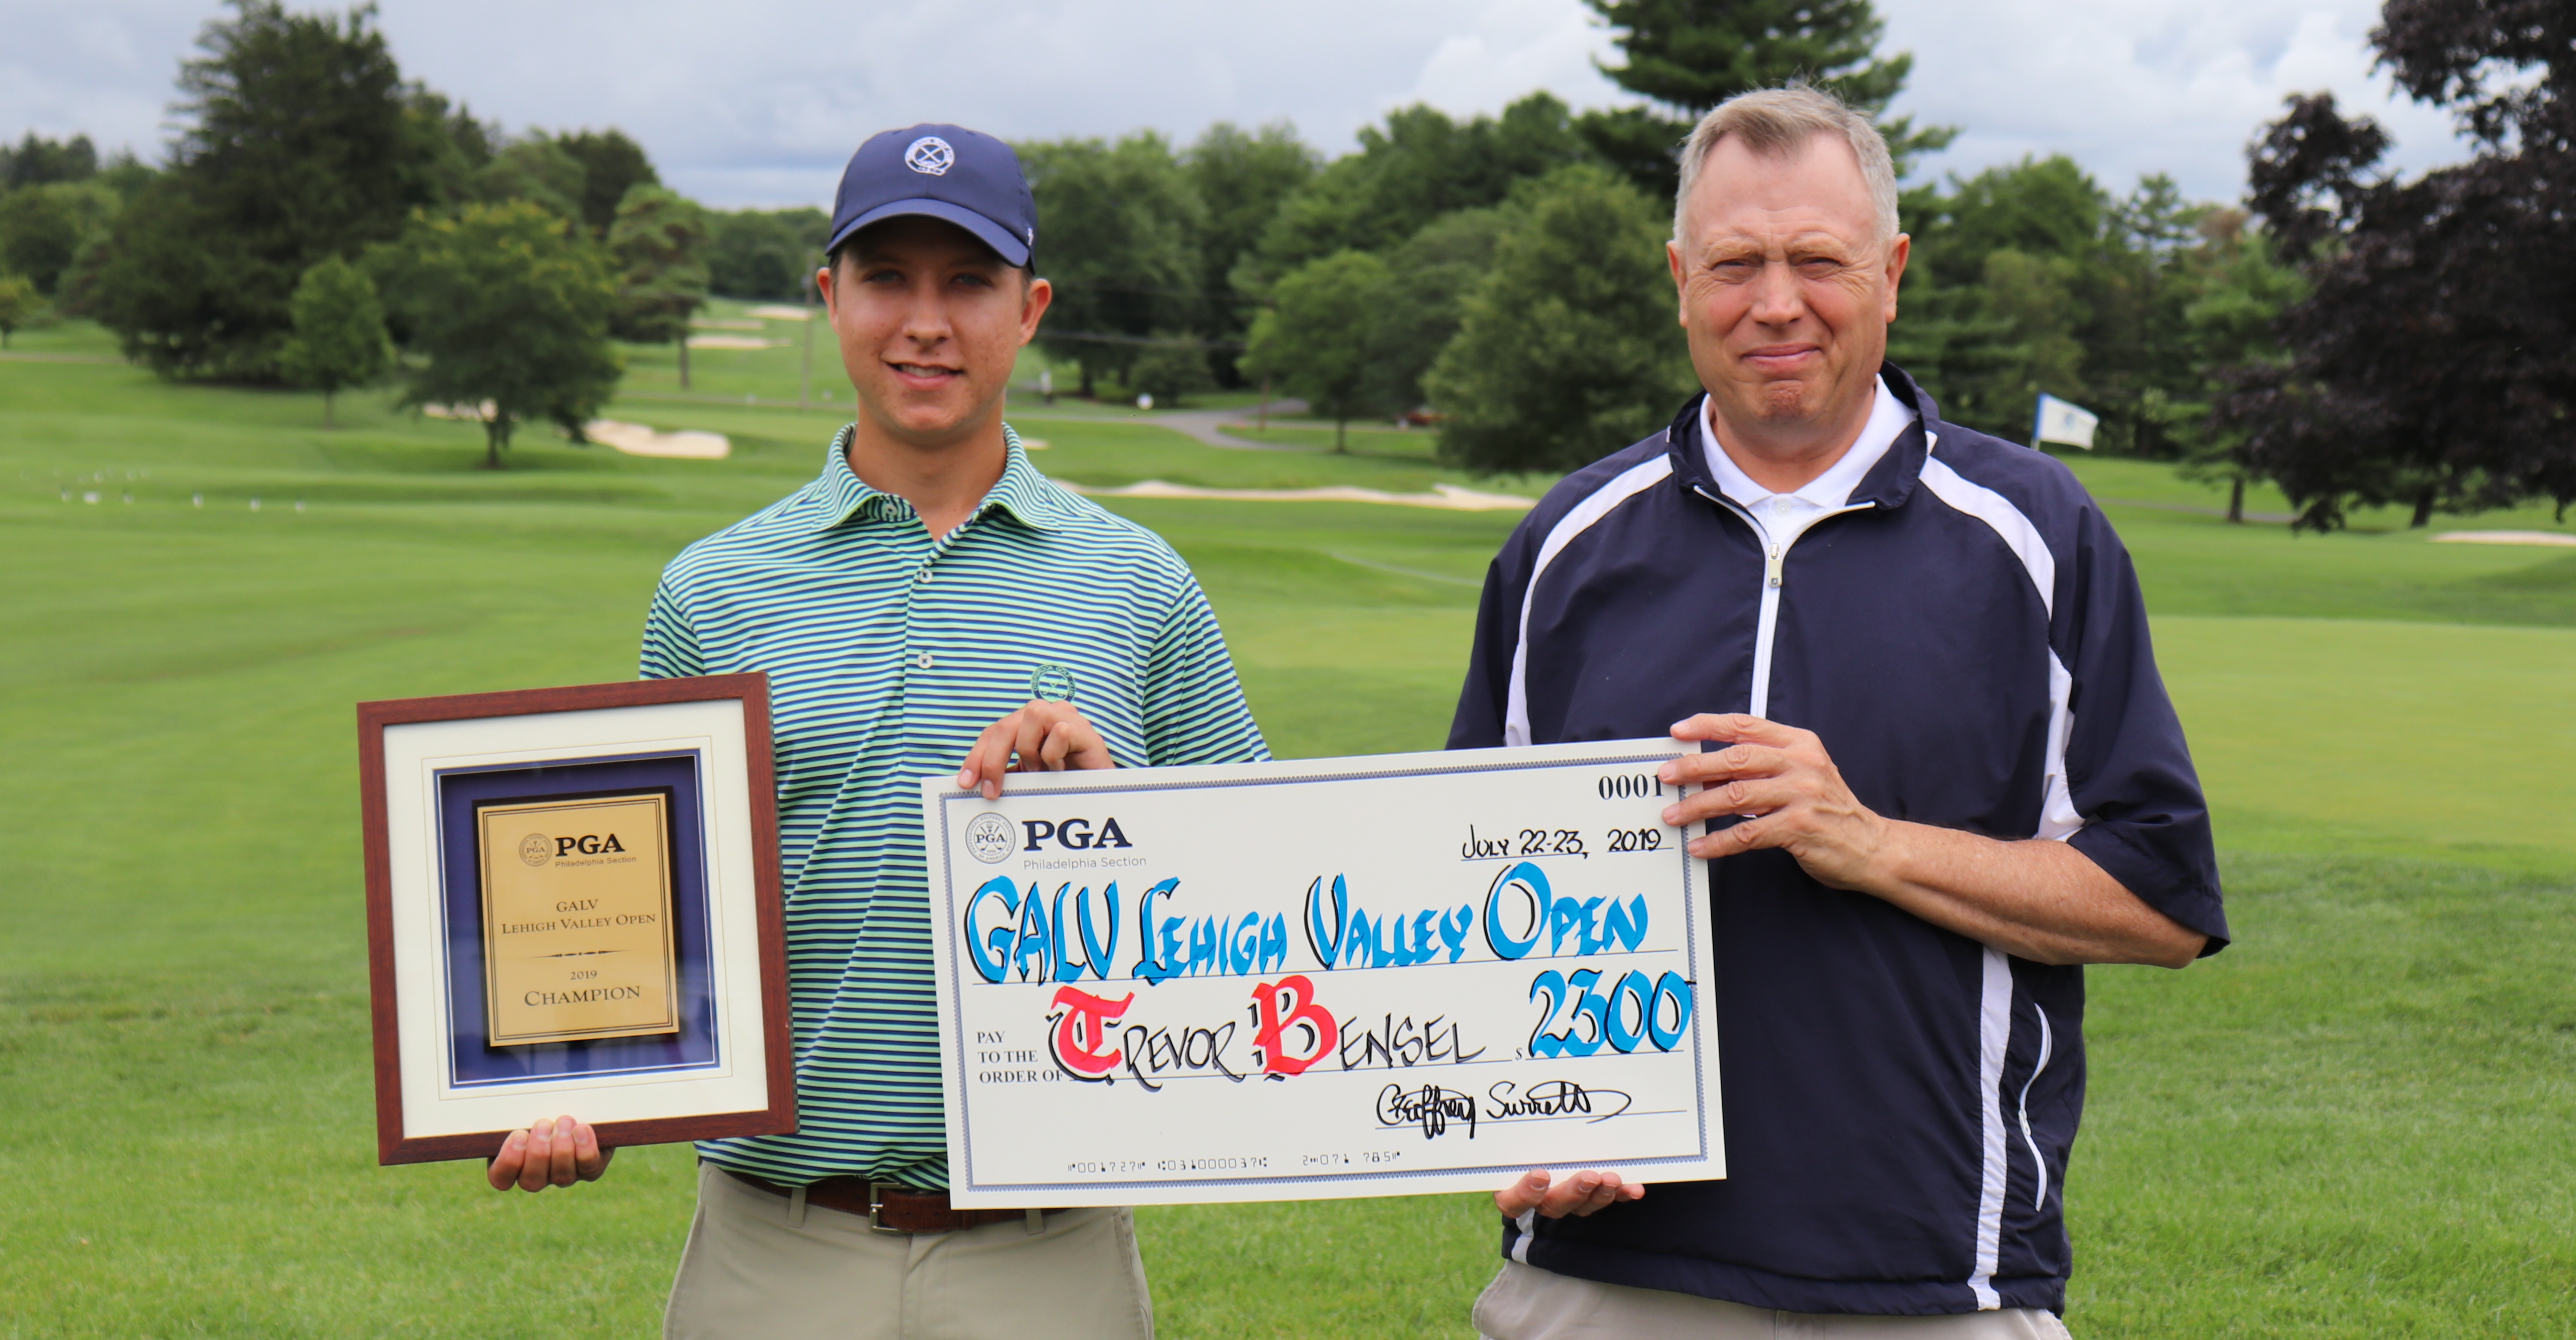 Bensel Outlasts Kennedy in Three-Hole Playoff at GALV Lehigh Valley Open Philadelphia